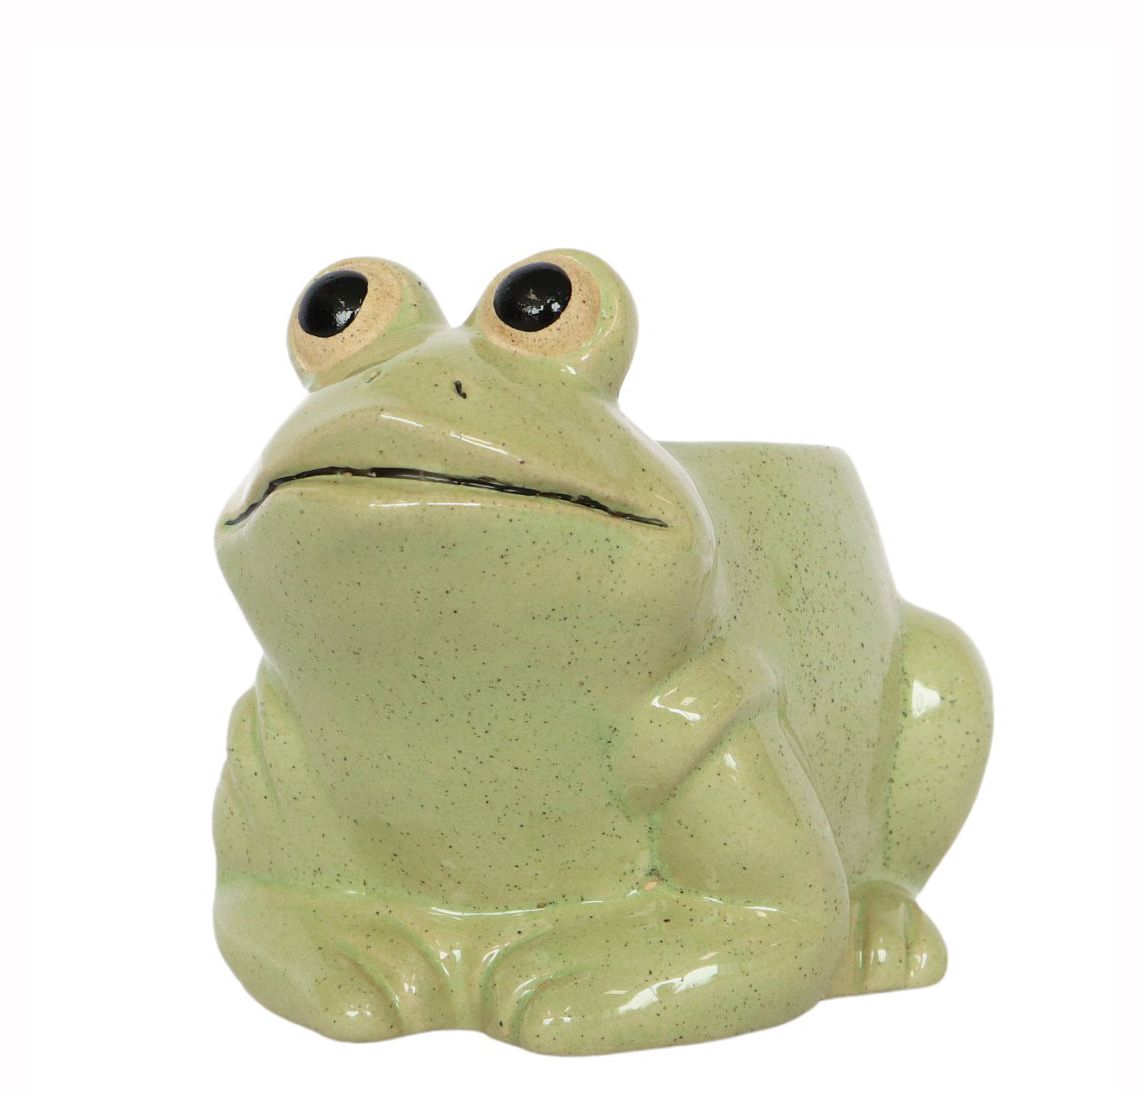 frog planter, frog pot, cute planter, quirky planter, animal planter, animal plant pot